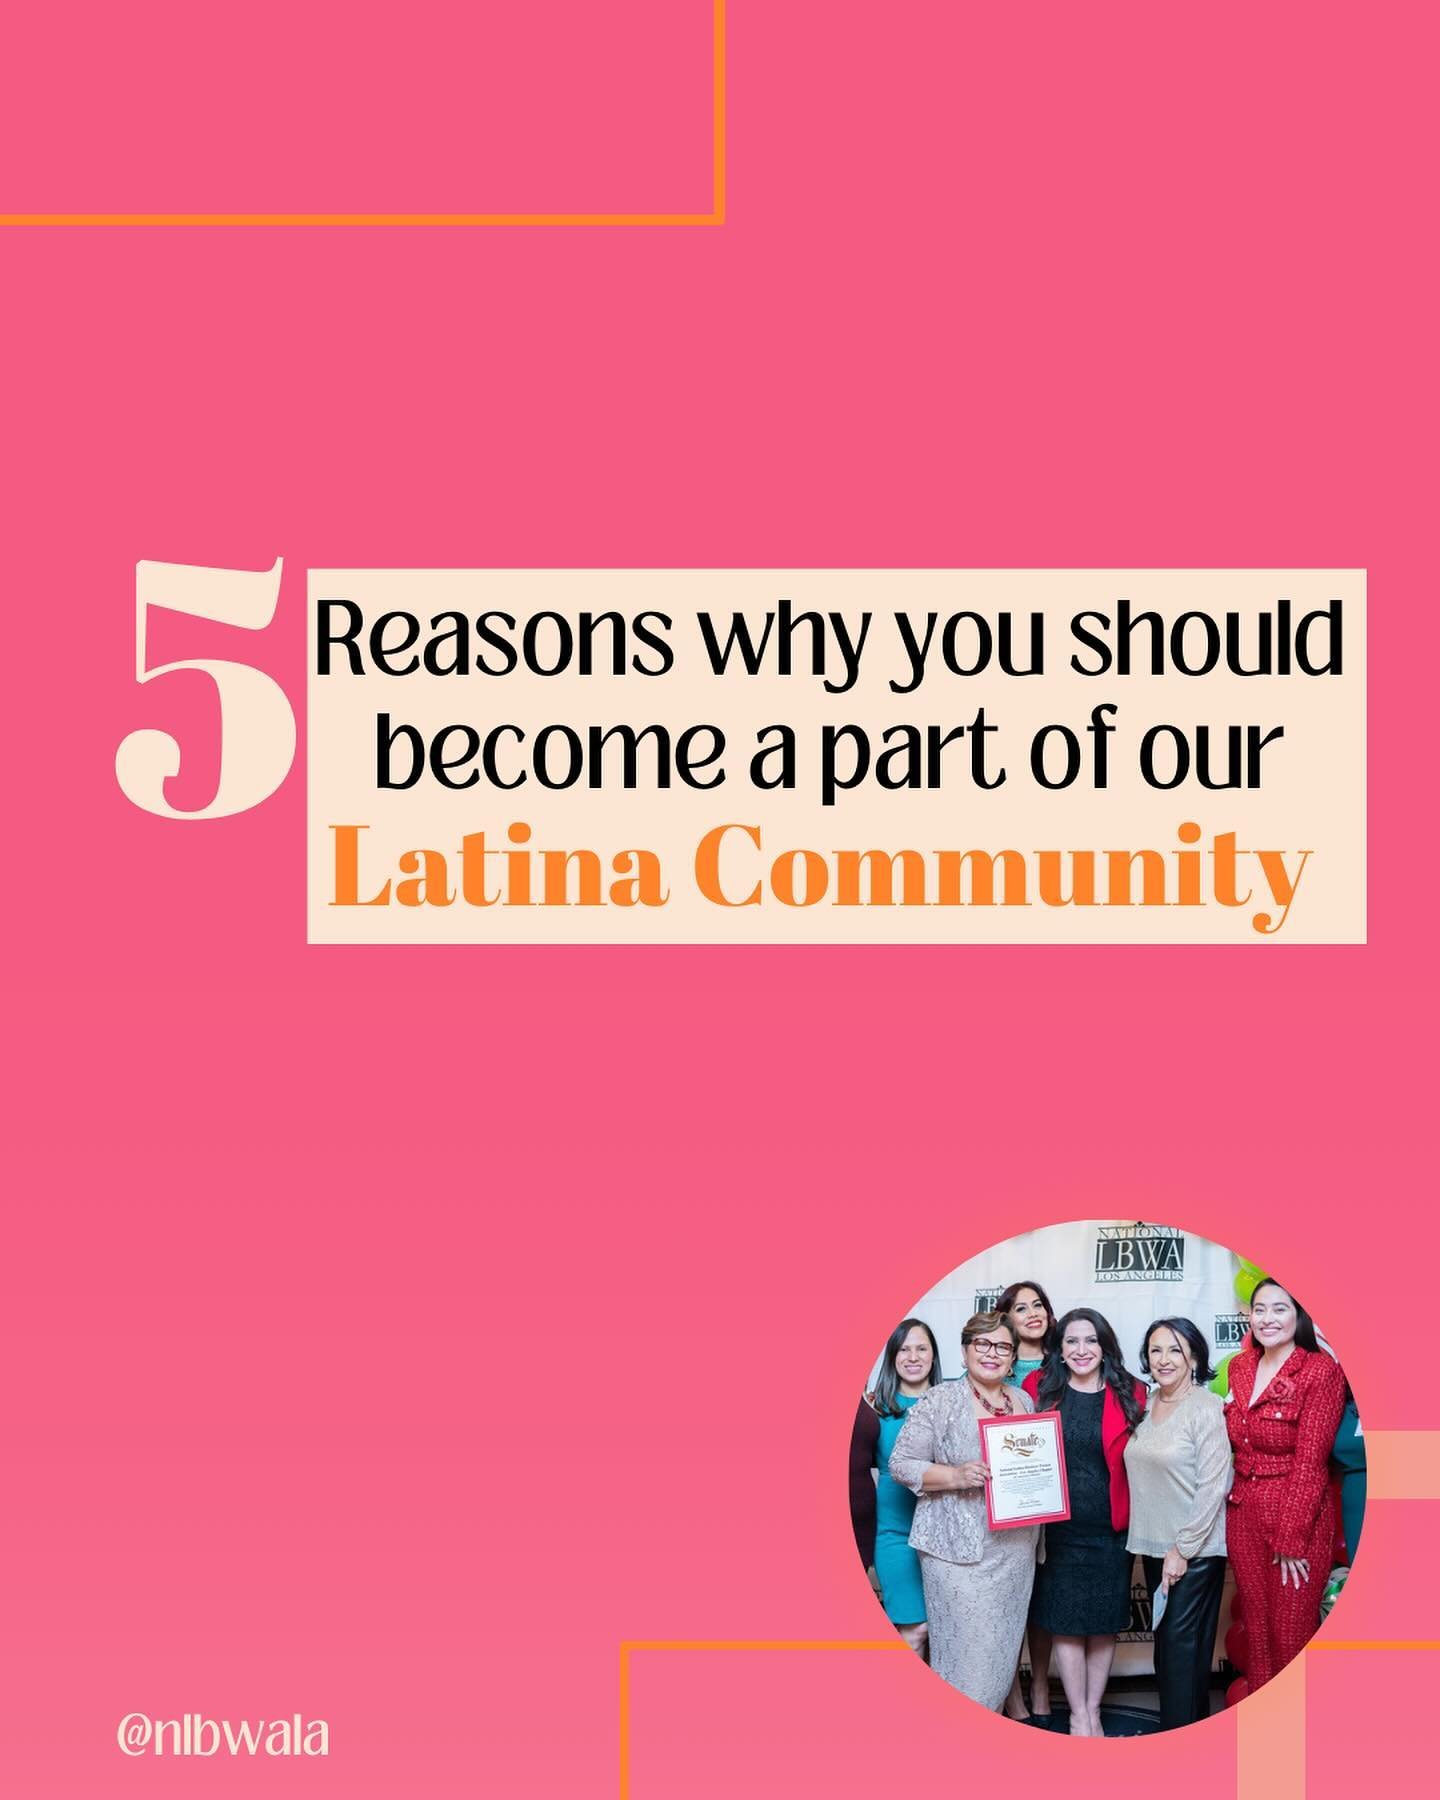 Ready to elevate your career and business?🤩 Join our vibrant Latina Community today! We are here to take you to the next level! 👏🏼 You get all of this and more for a low cost!
⁠
Your success is our priority&mdash;we listen, we empower, and togethe